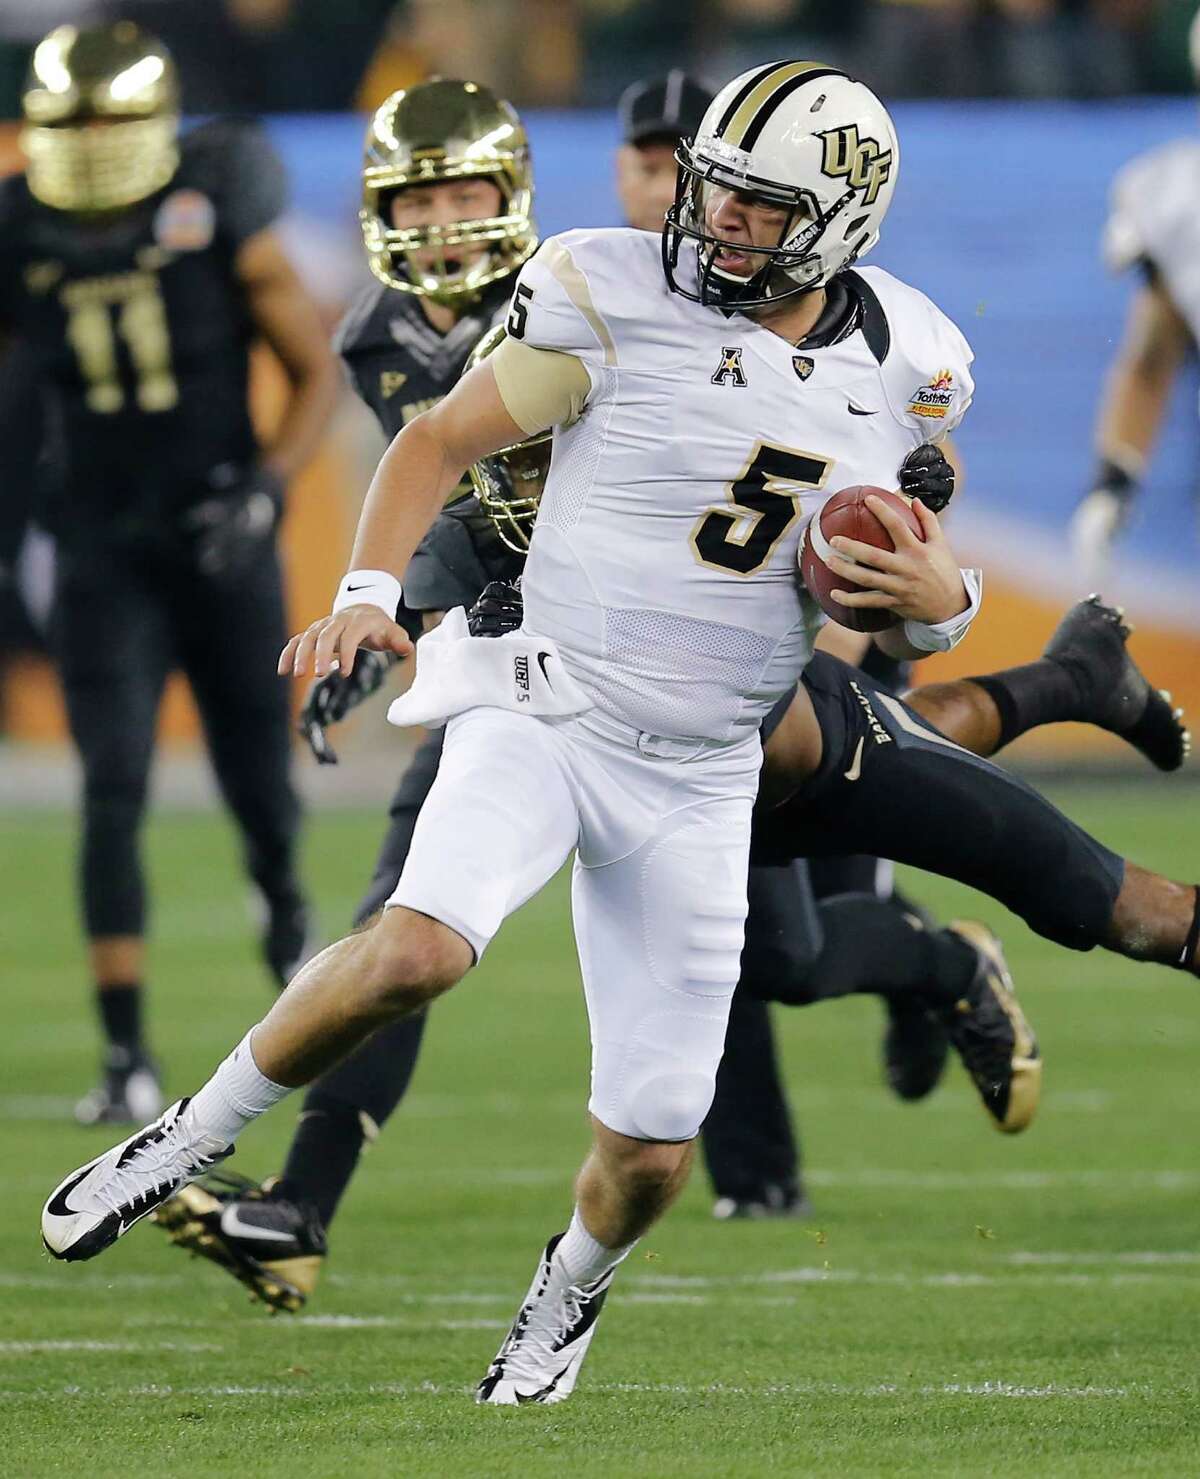 UCF's Blake Bortles hurt the Baylor defense with his feet (more than 11 yards per rush) and arm (three TD passes).